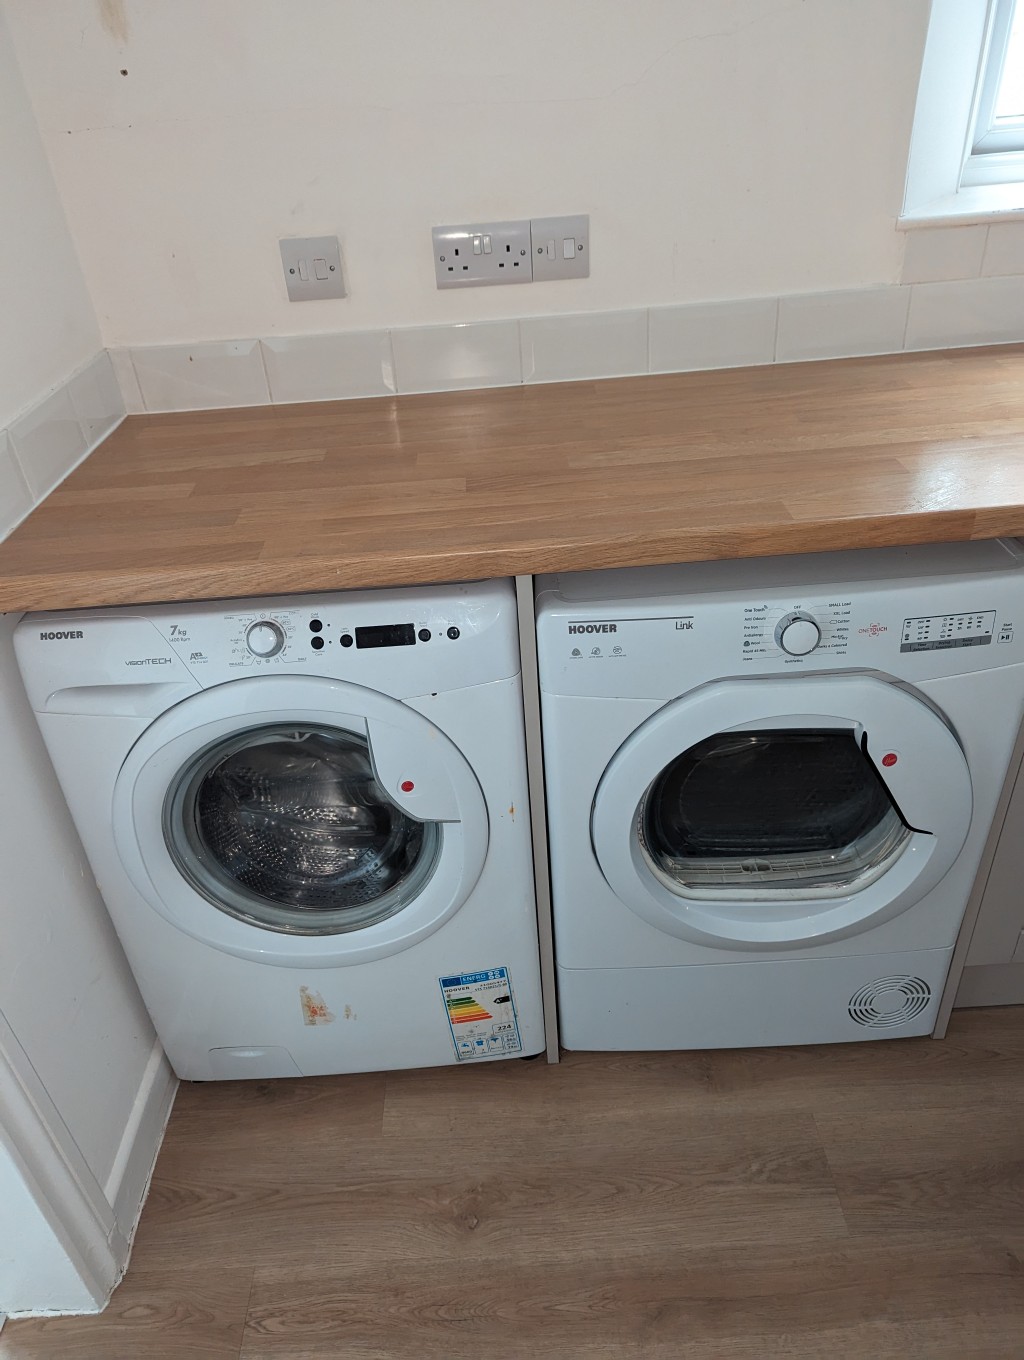 Images for Pinhoe Road, -Bills included option available at £160pppw, Exeter